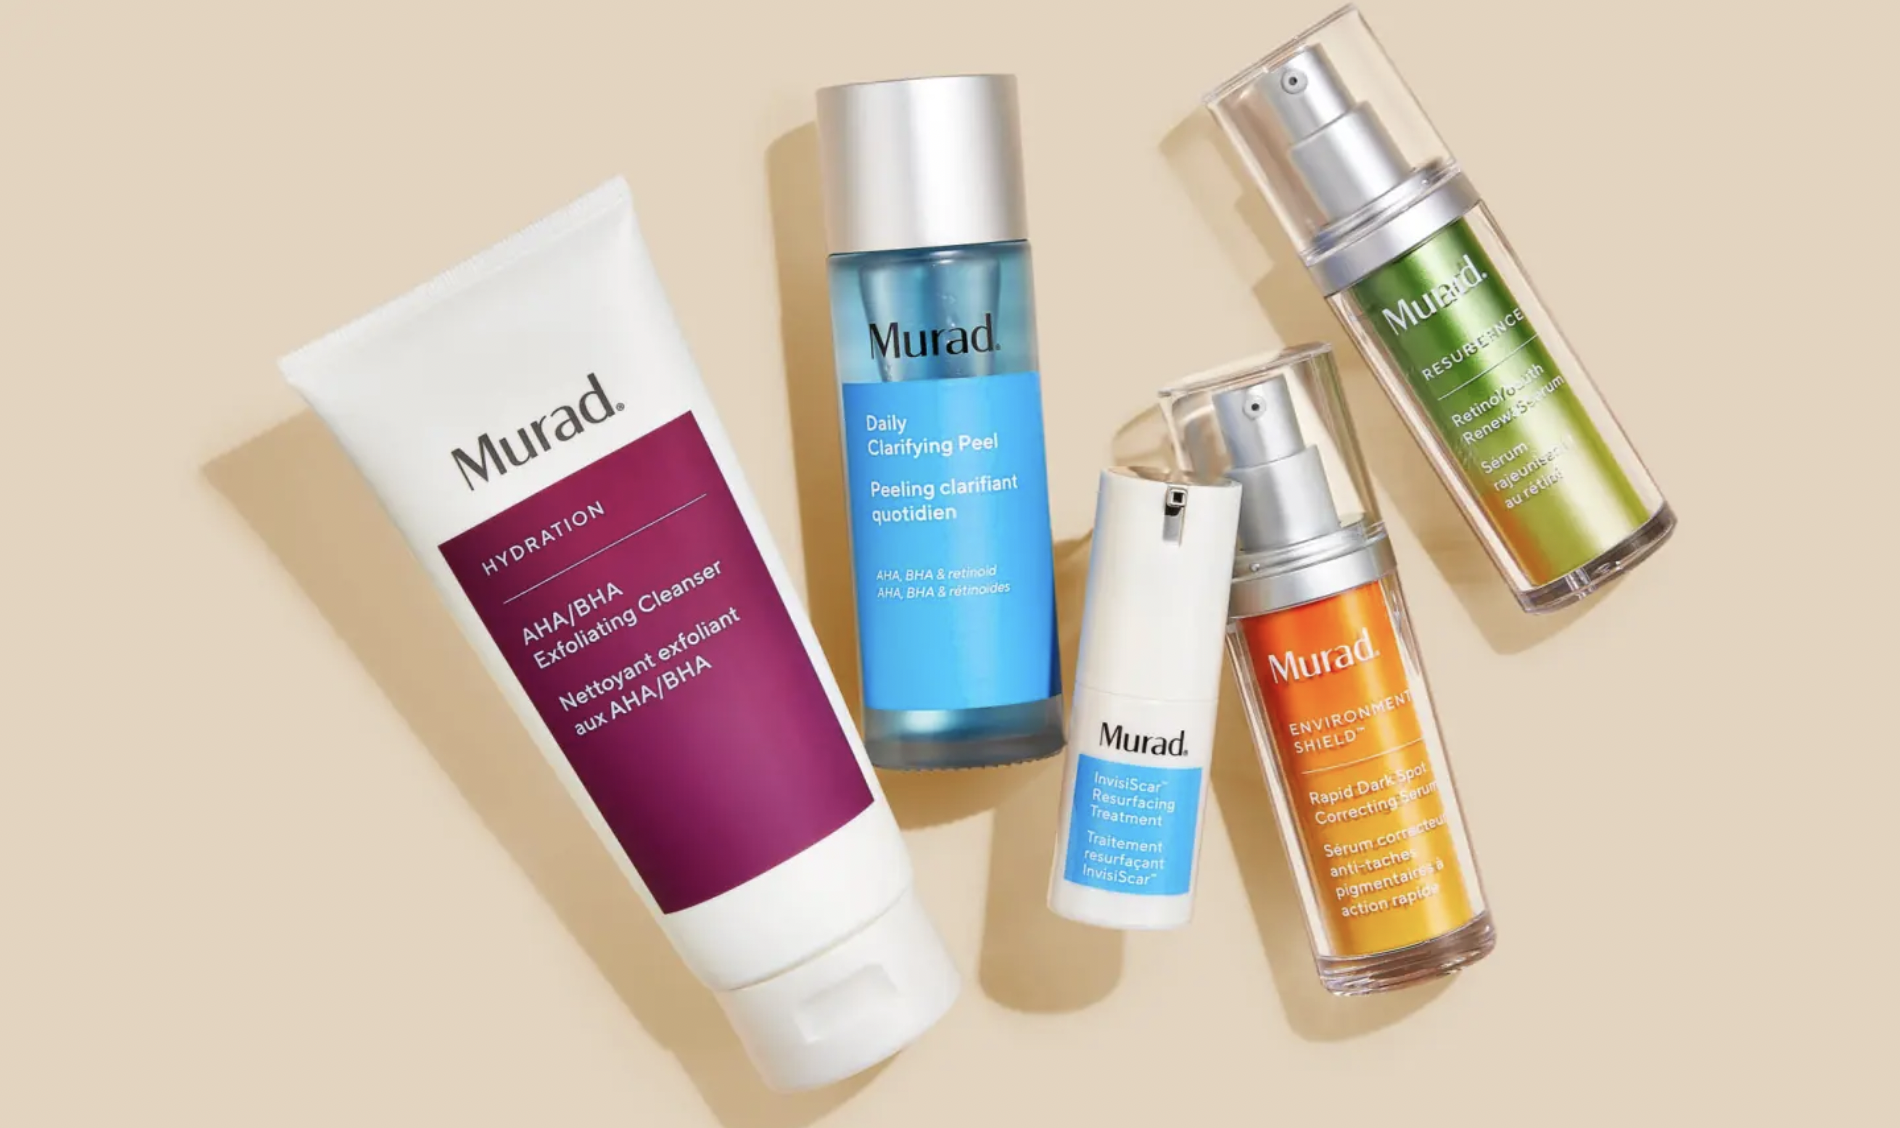 Murad: Friends & Family Event. 20% off sitewide